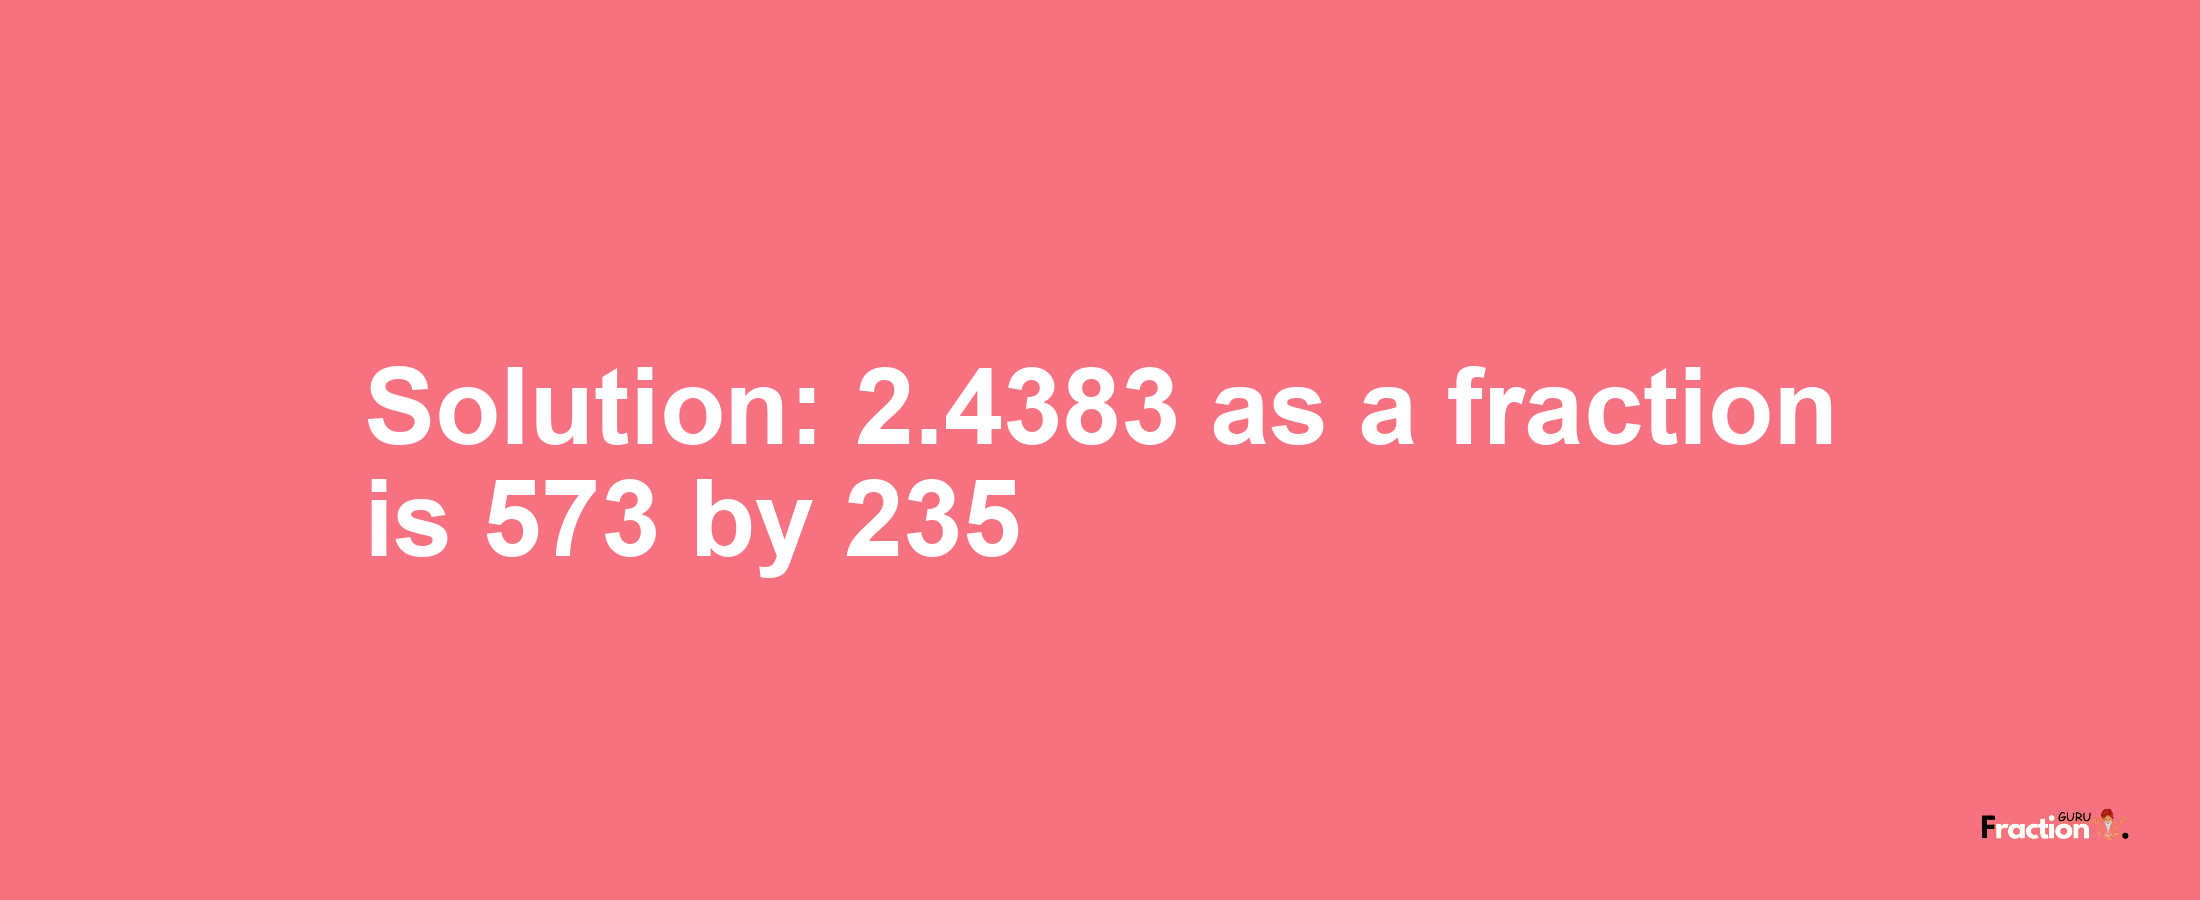 Solution:2.4383 as a fraction is 573/235